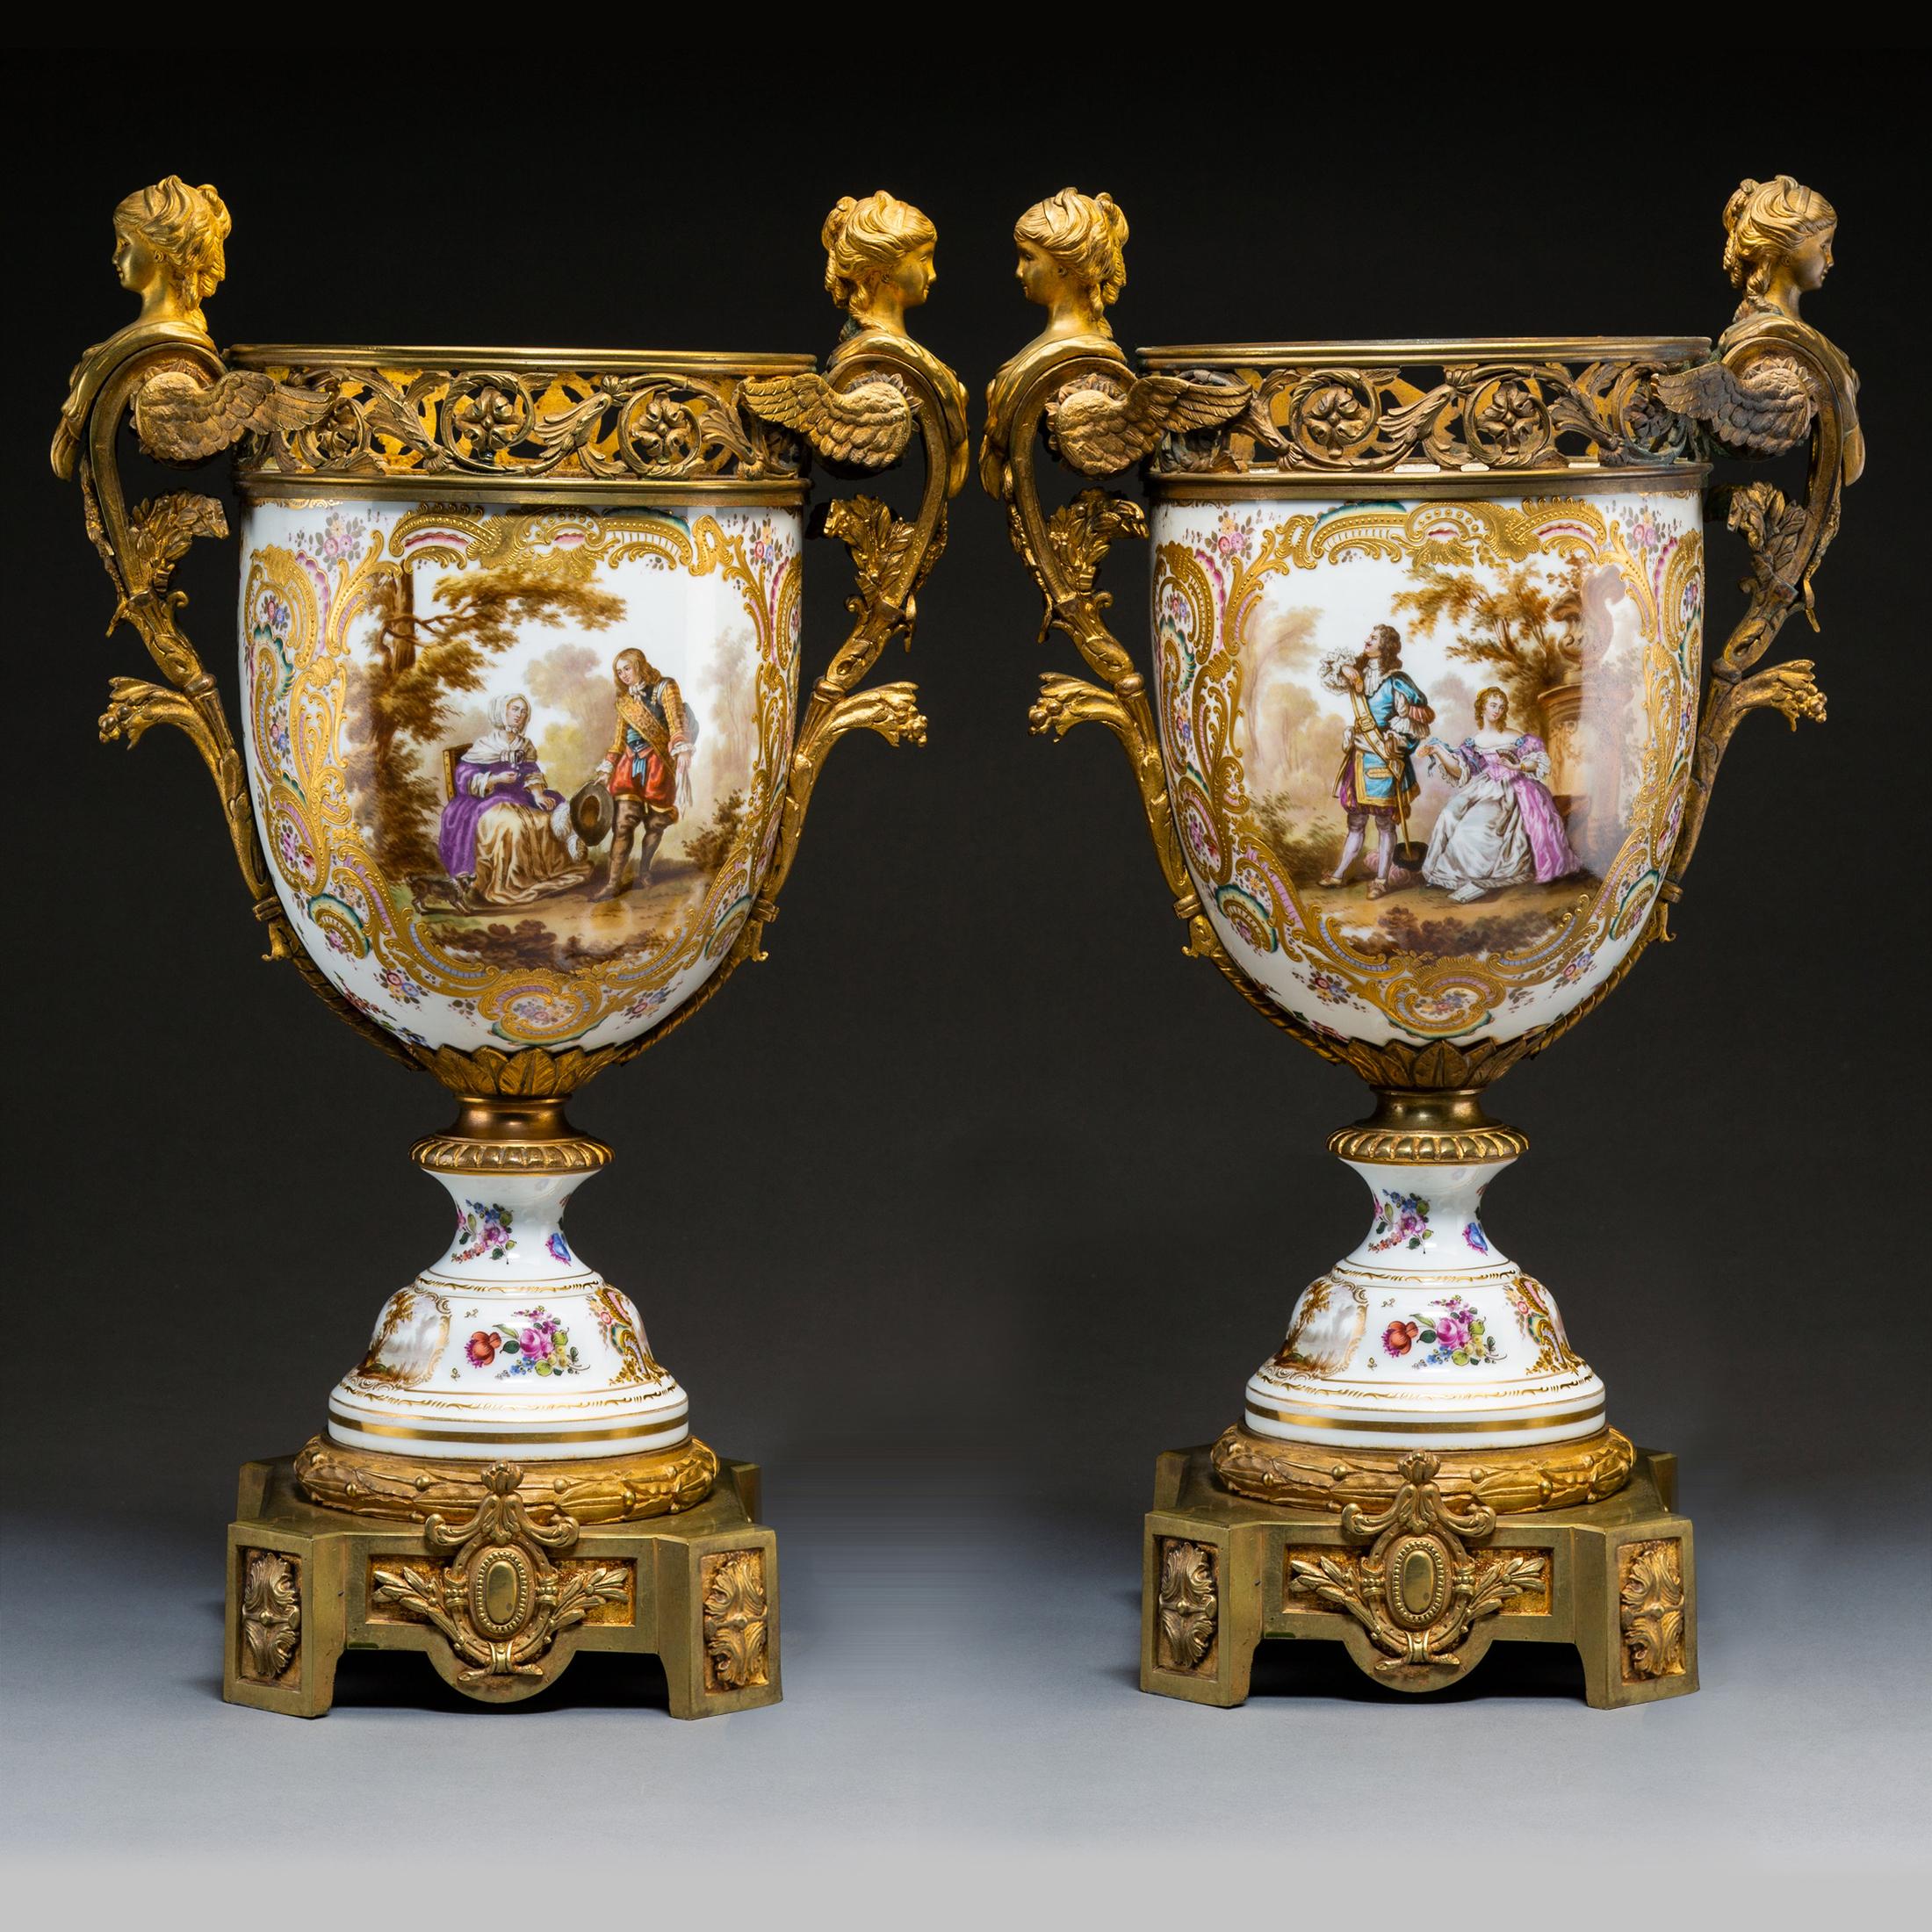 An elegant pair of continental gilt bronze-mounted painted porcelain urns
Origin: French
Date: circa 1900
Mark: Crossed Swords Mark
Dimension: 22 x 14 inches.